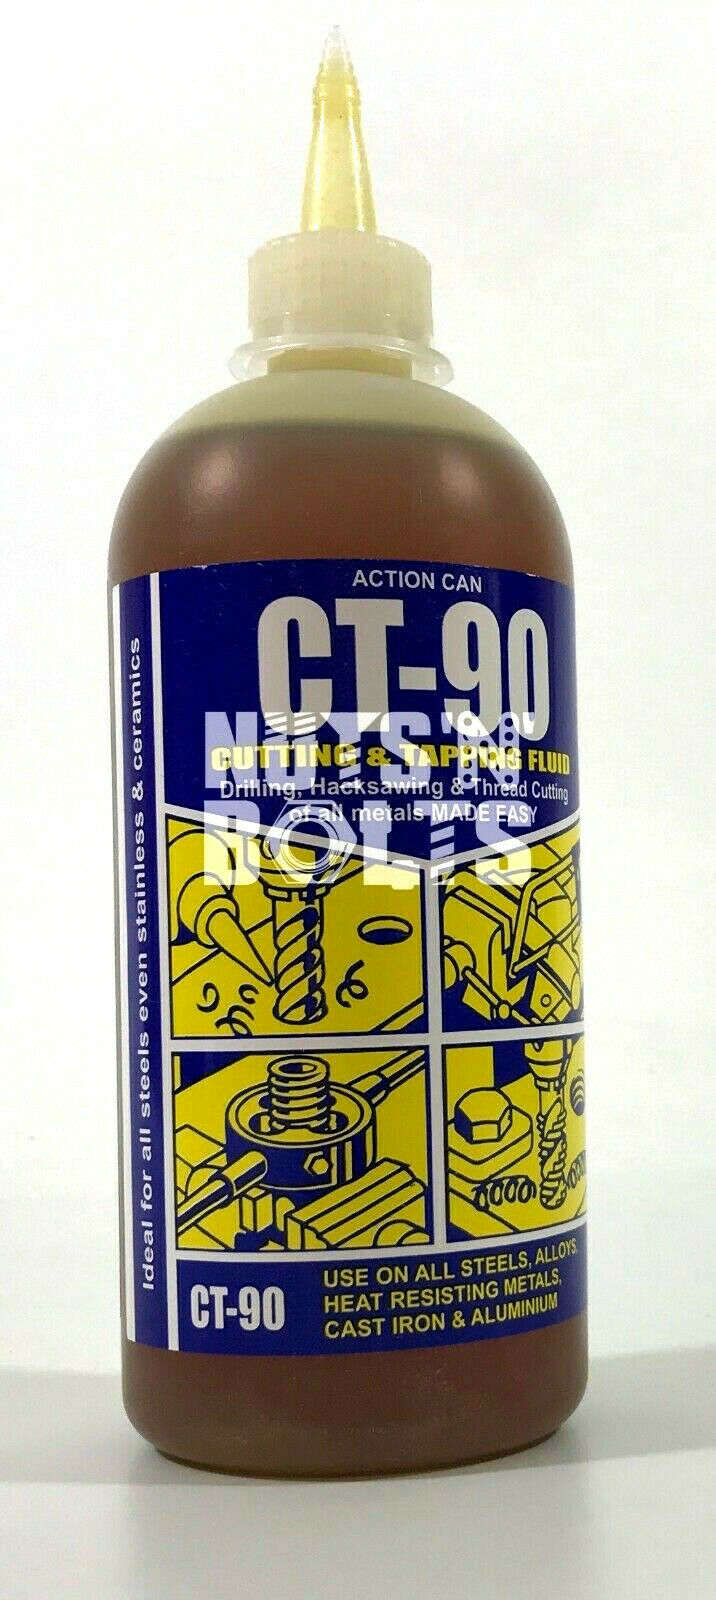 1 bottle of CT-90 Fluid and 1 Tin of CT-90 Compound cutting and tapping solution